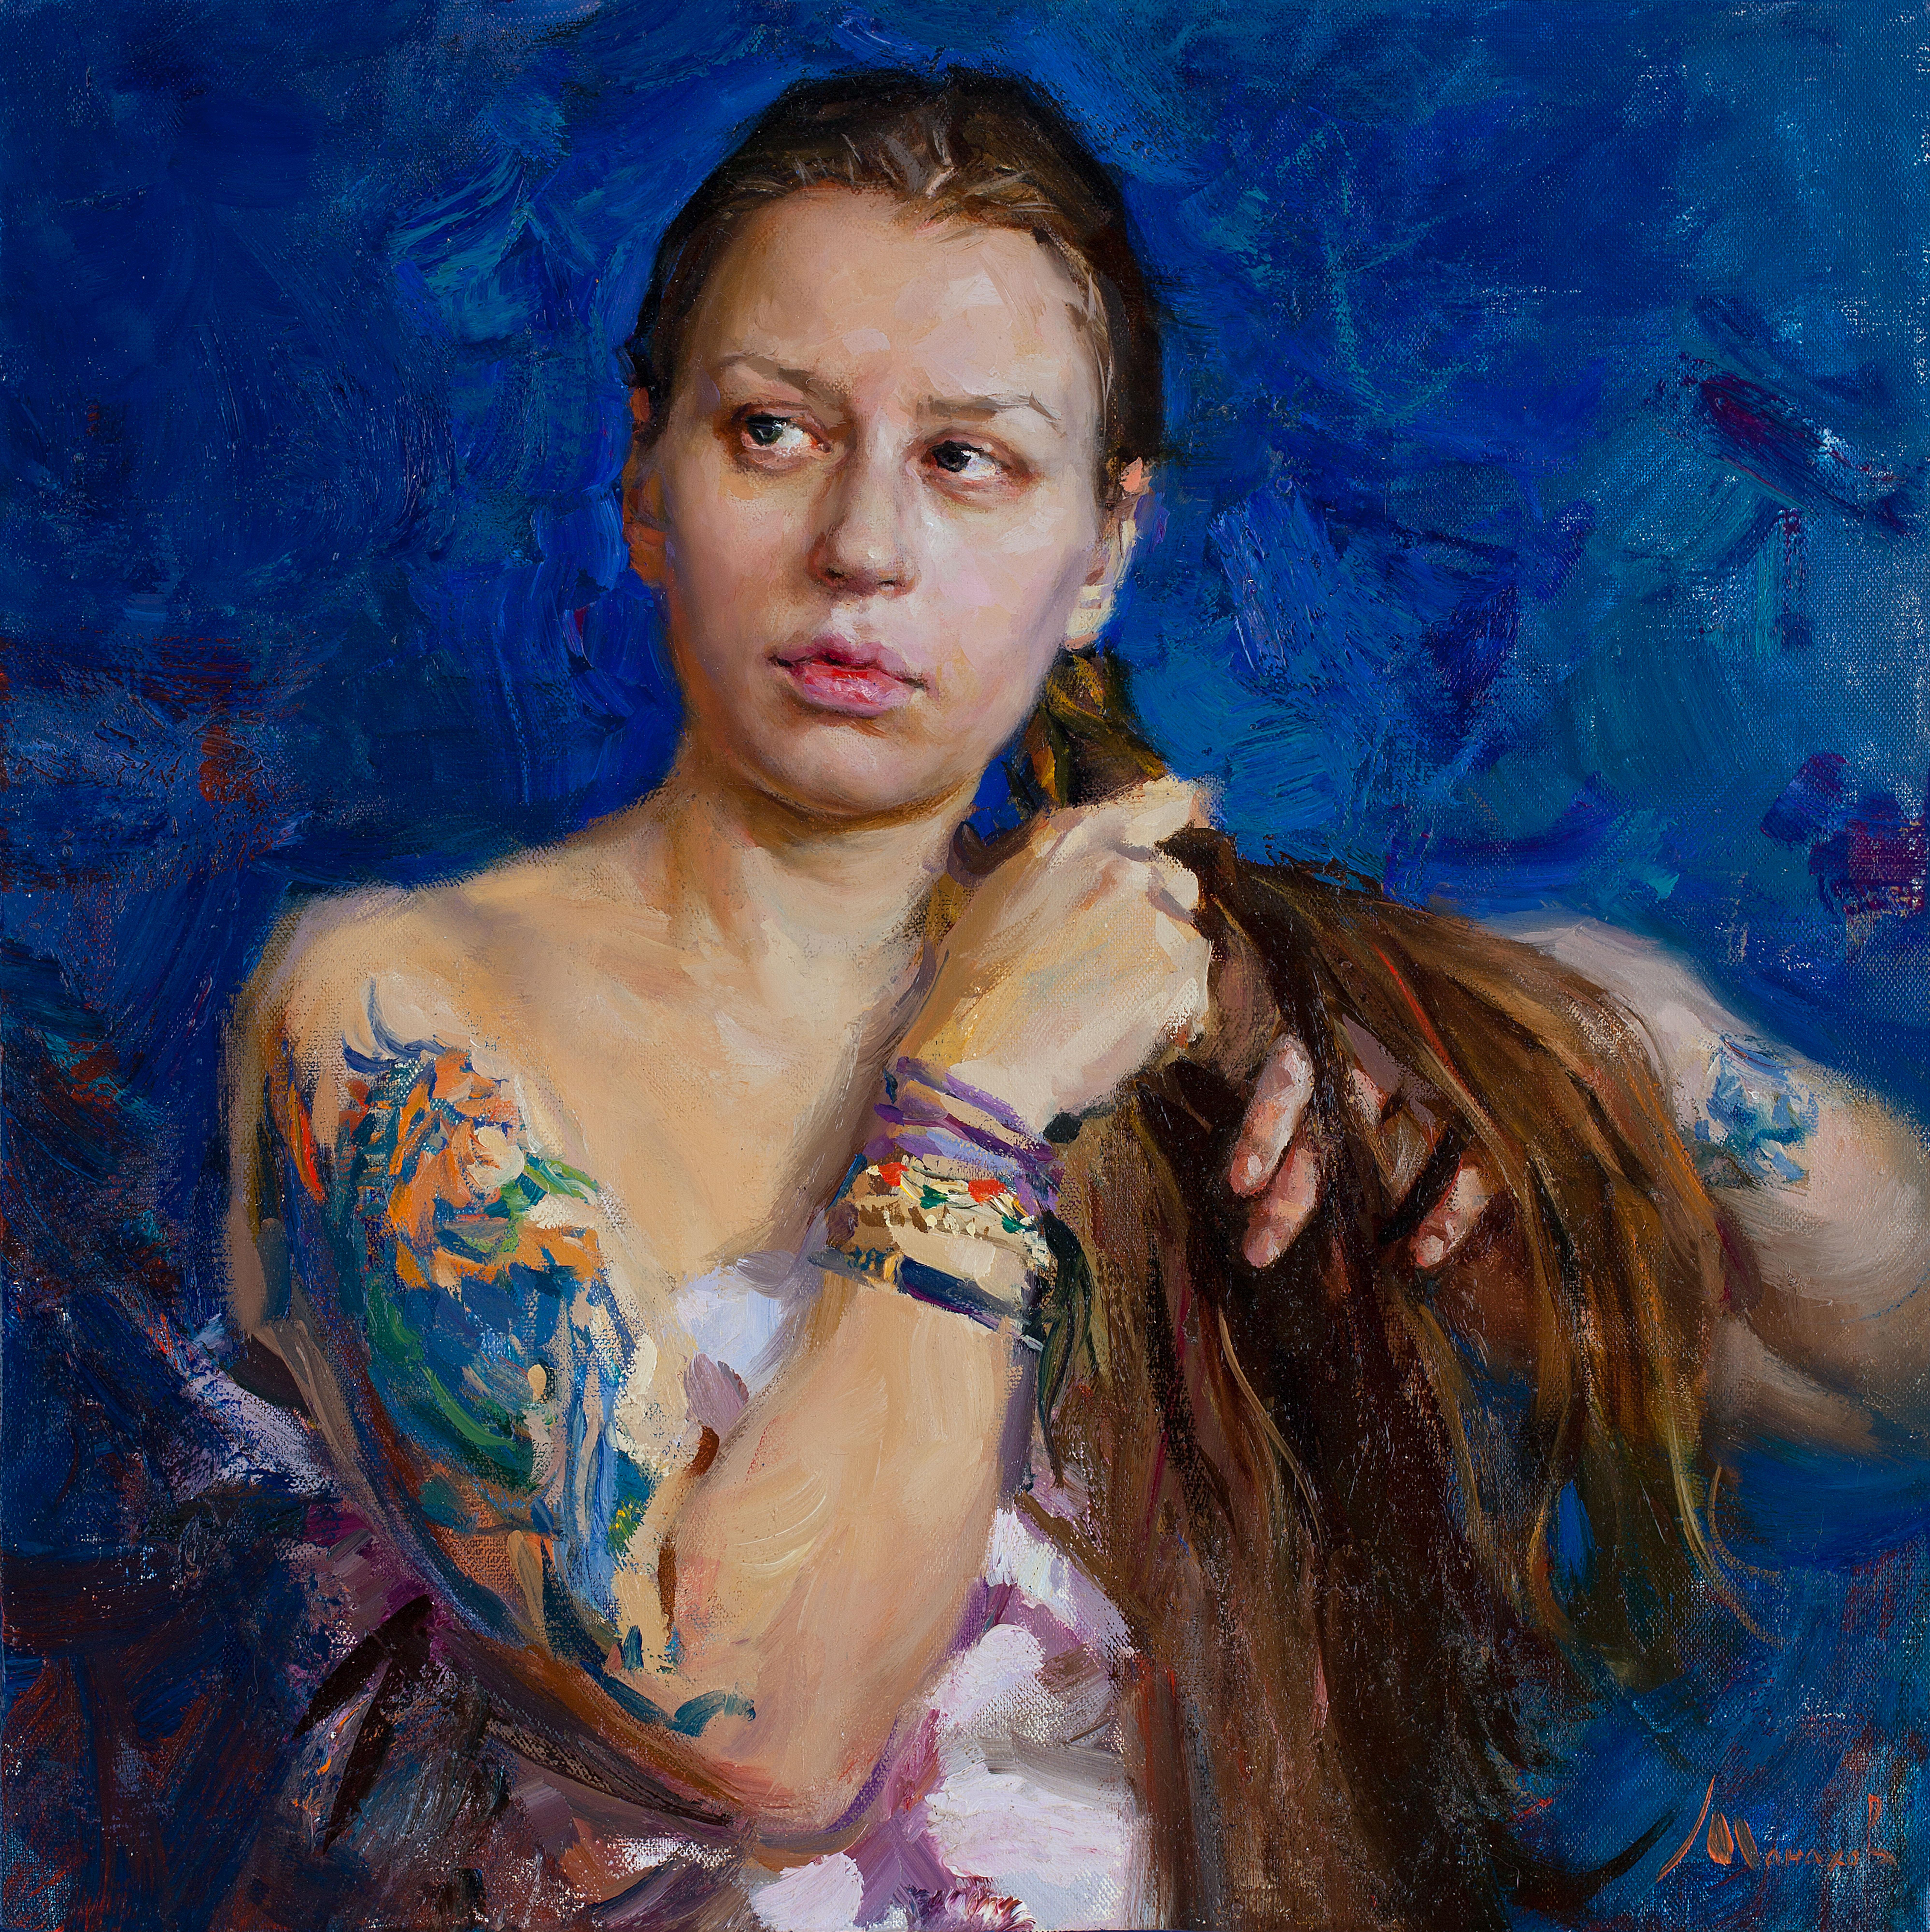 Evgeniy Monahov Figurative Painting - Girl with the Chimera Tattoo